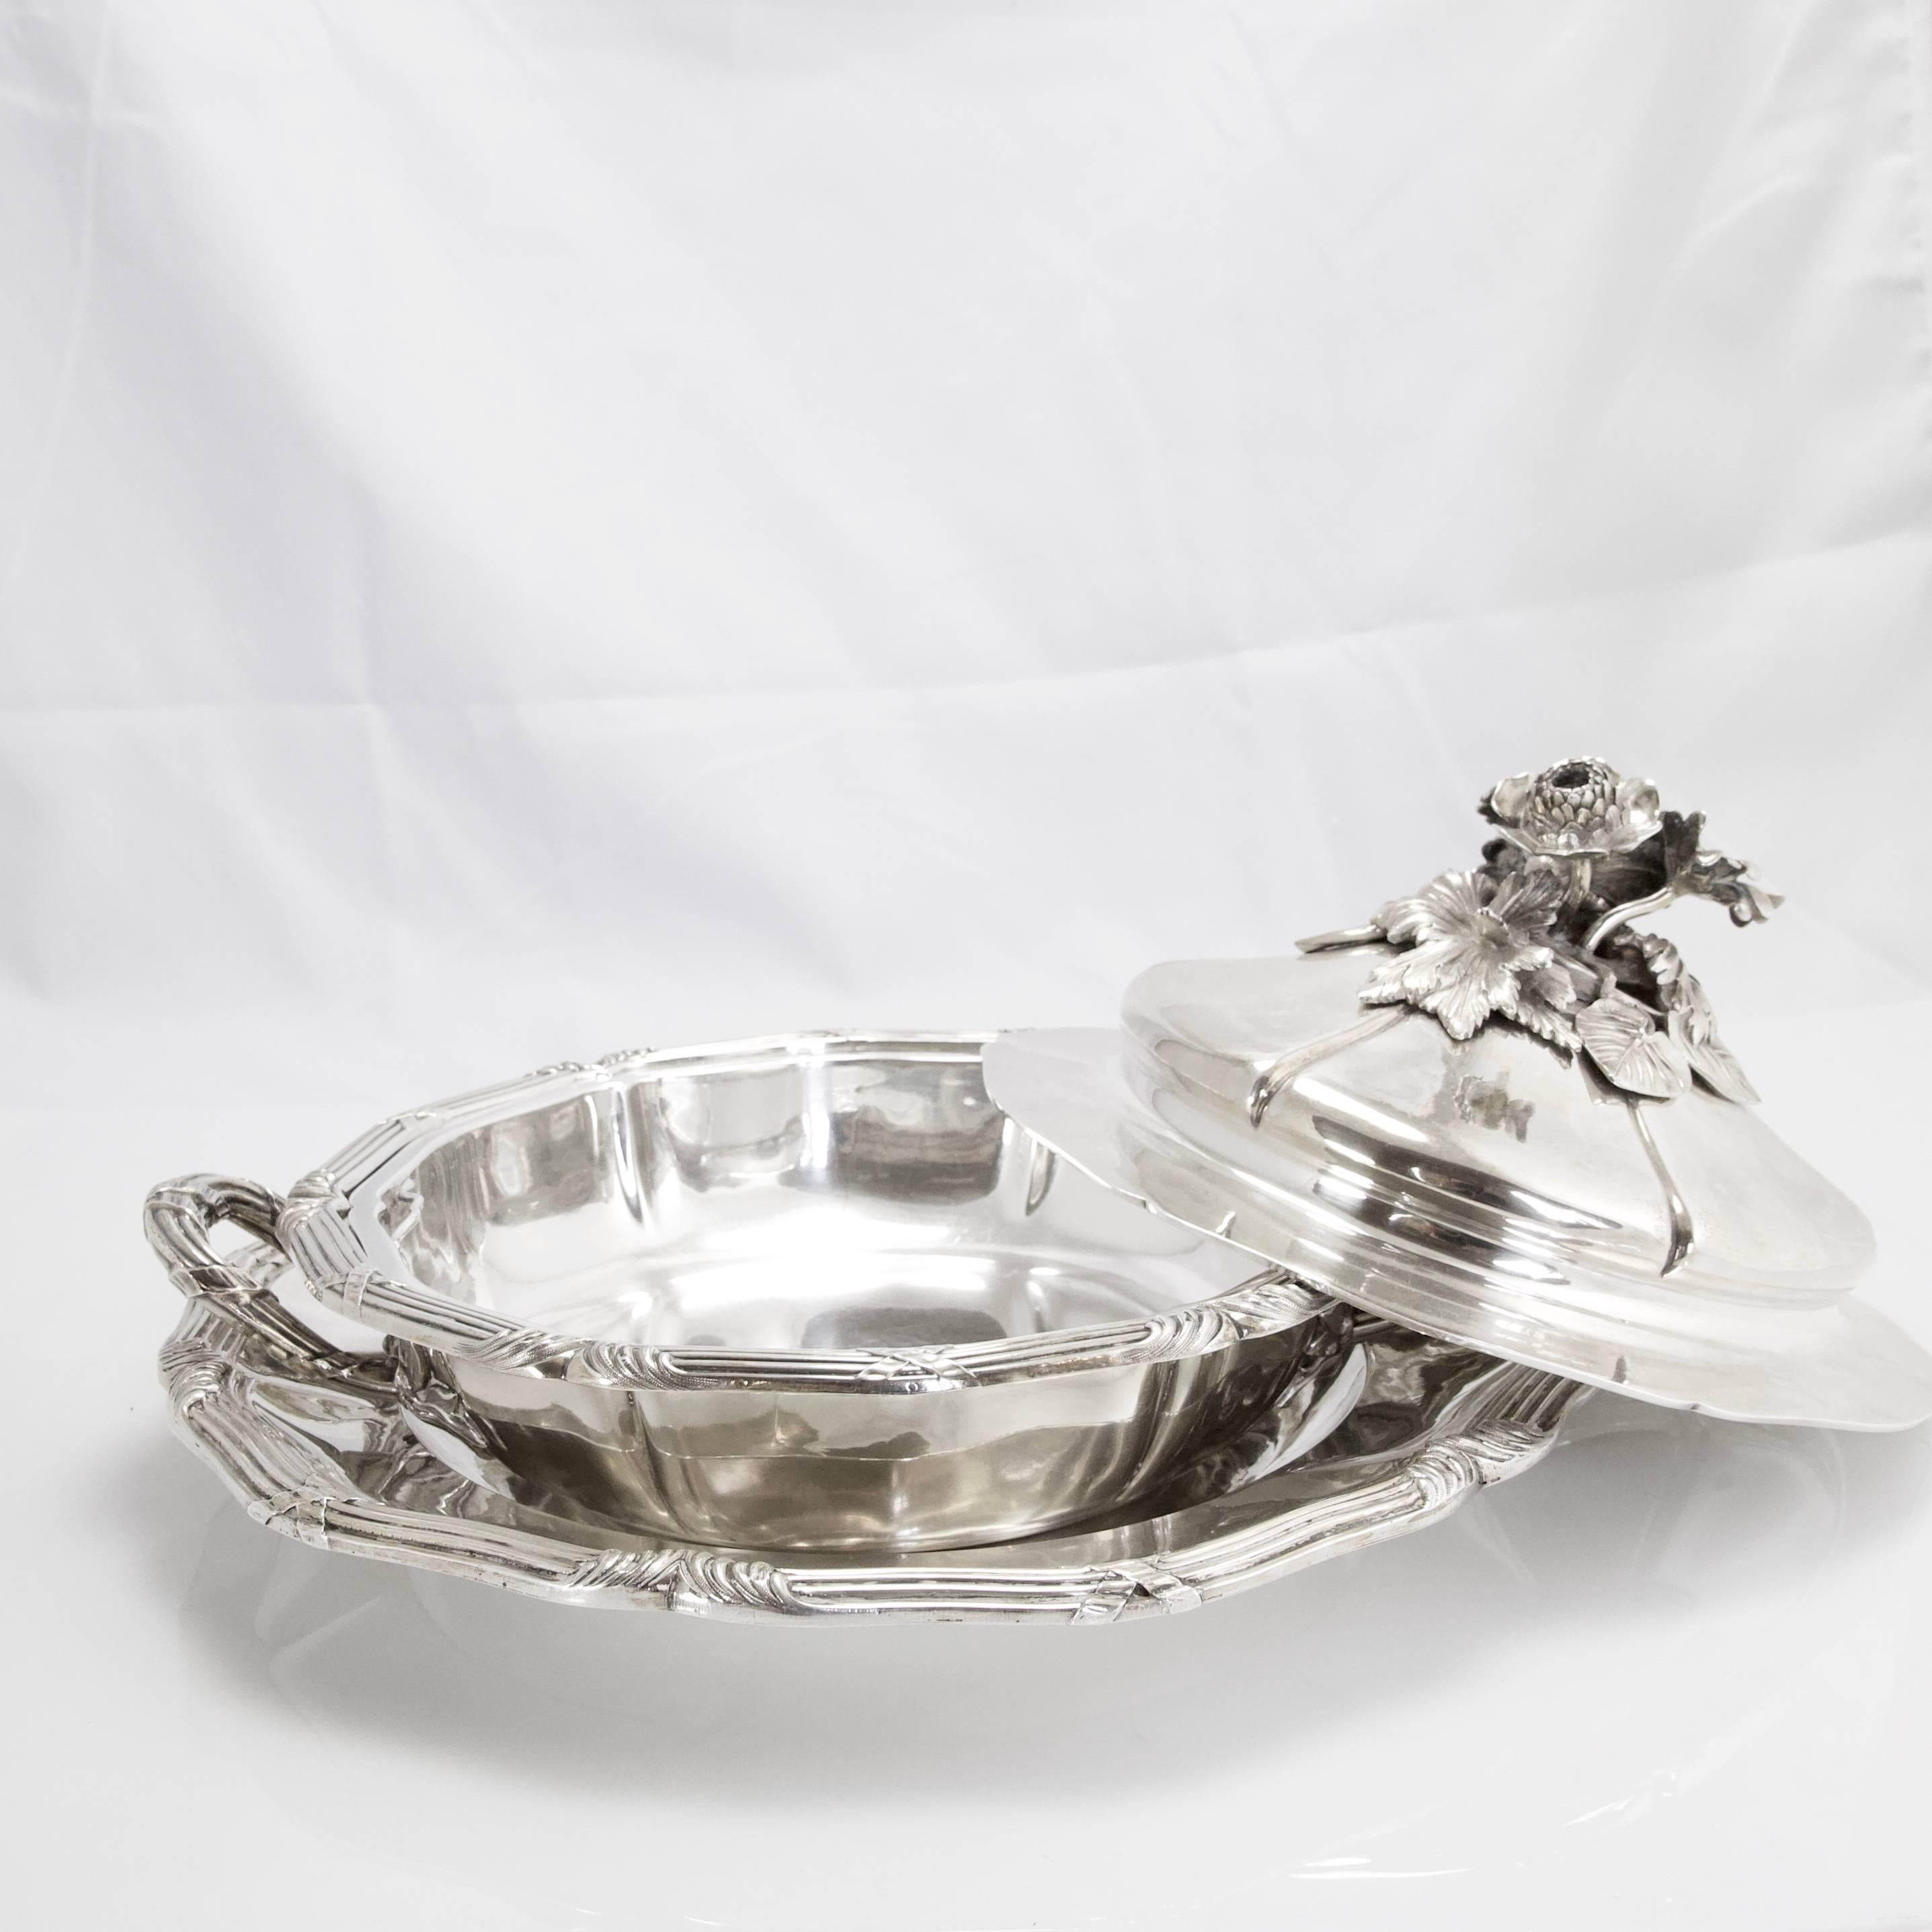 A covered vegetable dishes in sterling silver 950.
Comprising four pieces: round tray, interior, dishes and lid.
Made by Odiot (tray made by another maker in the same style)
Made in France around 1900.
Maker's mark of Odiot. Signature.
French